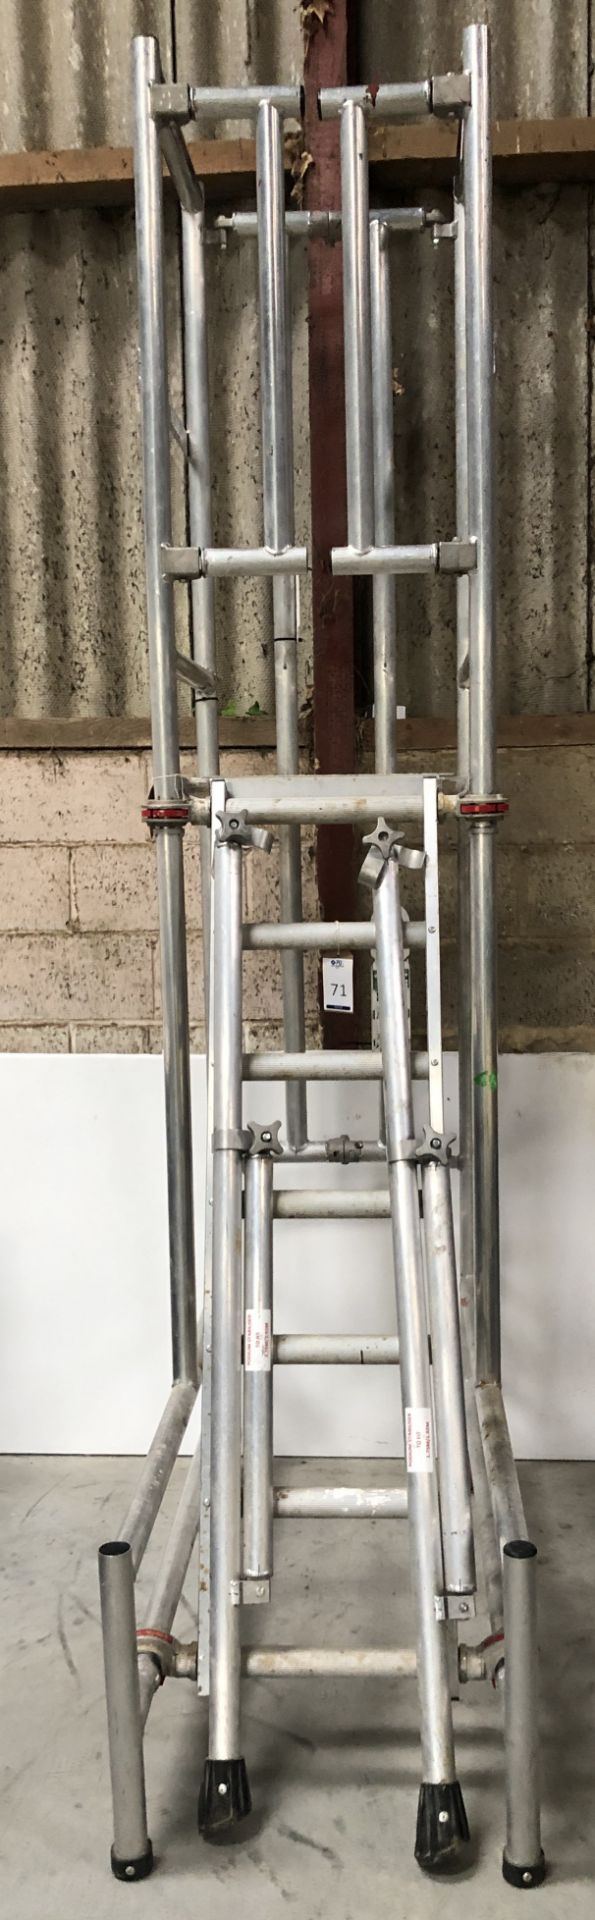 Aluminium Podium Tower, 2m Platform Height, with Ladders & Braces (Location: Brentwood. Please Refer